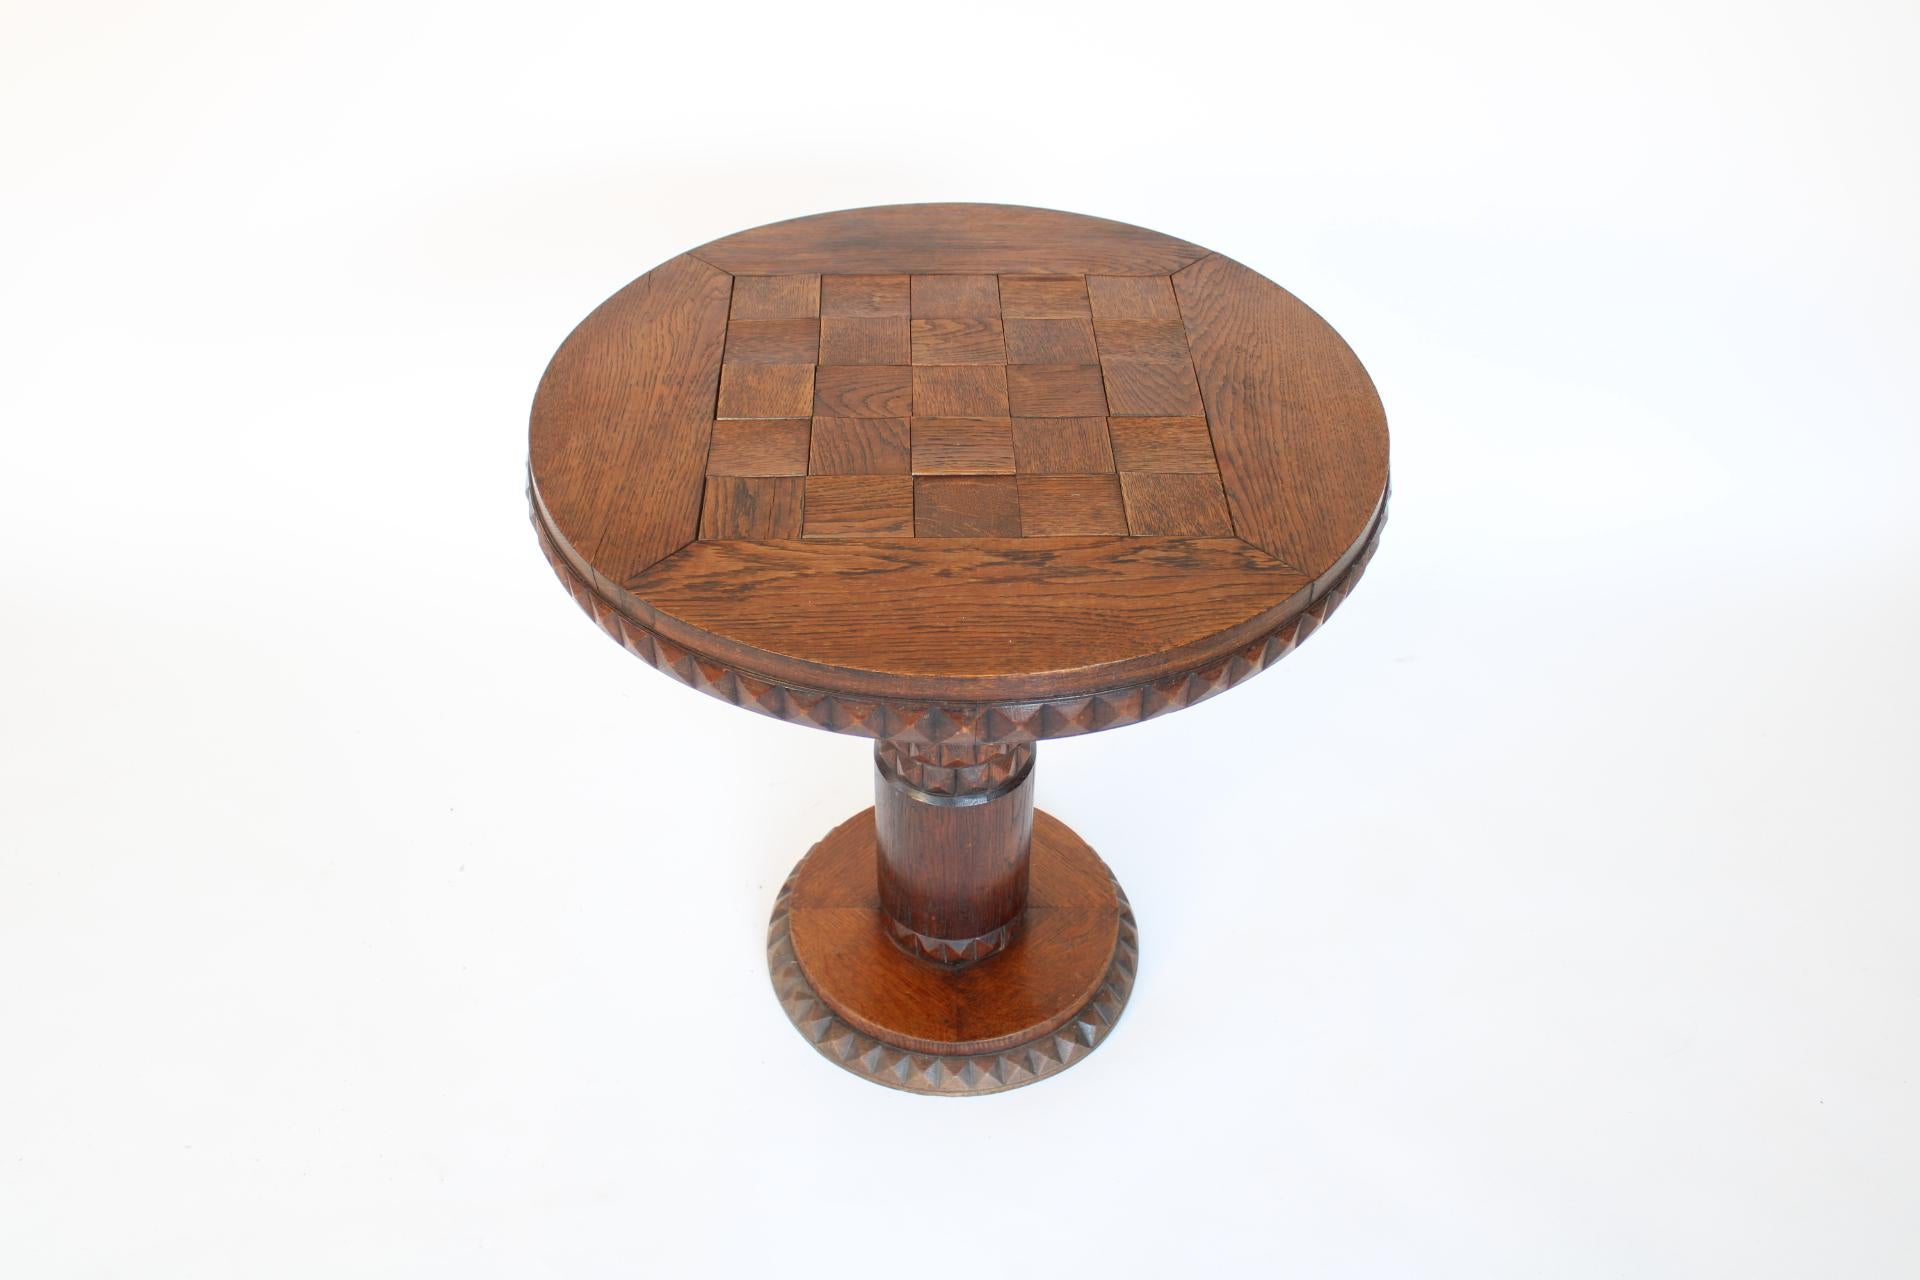 French Oak Side Carved Table Art Deco Africanist Influence Attributed to Dudouyt In Good Condition For Sale In Chicago, IL